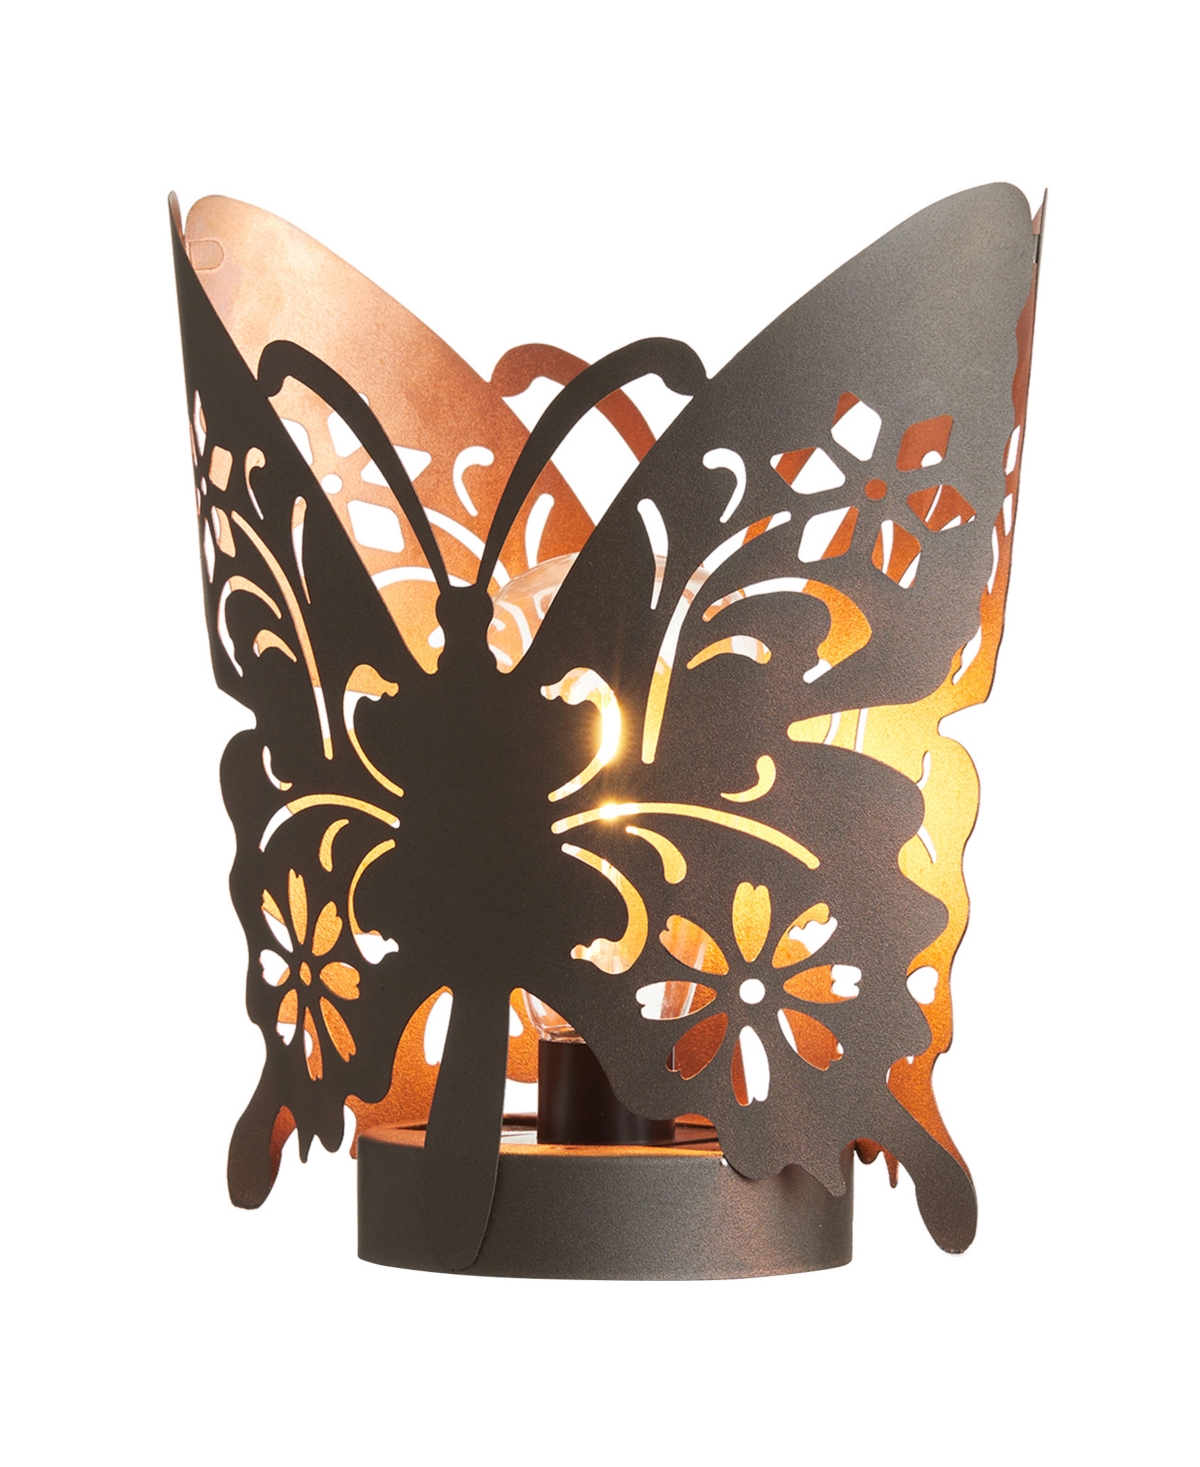 9" L Black and Gold-Tone Metal Cutout Flying Butterfly Silhouette Solar Powdered Edison Bulb Outdoor Lantern - Multi